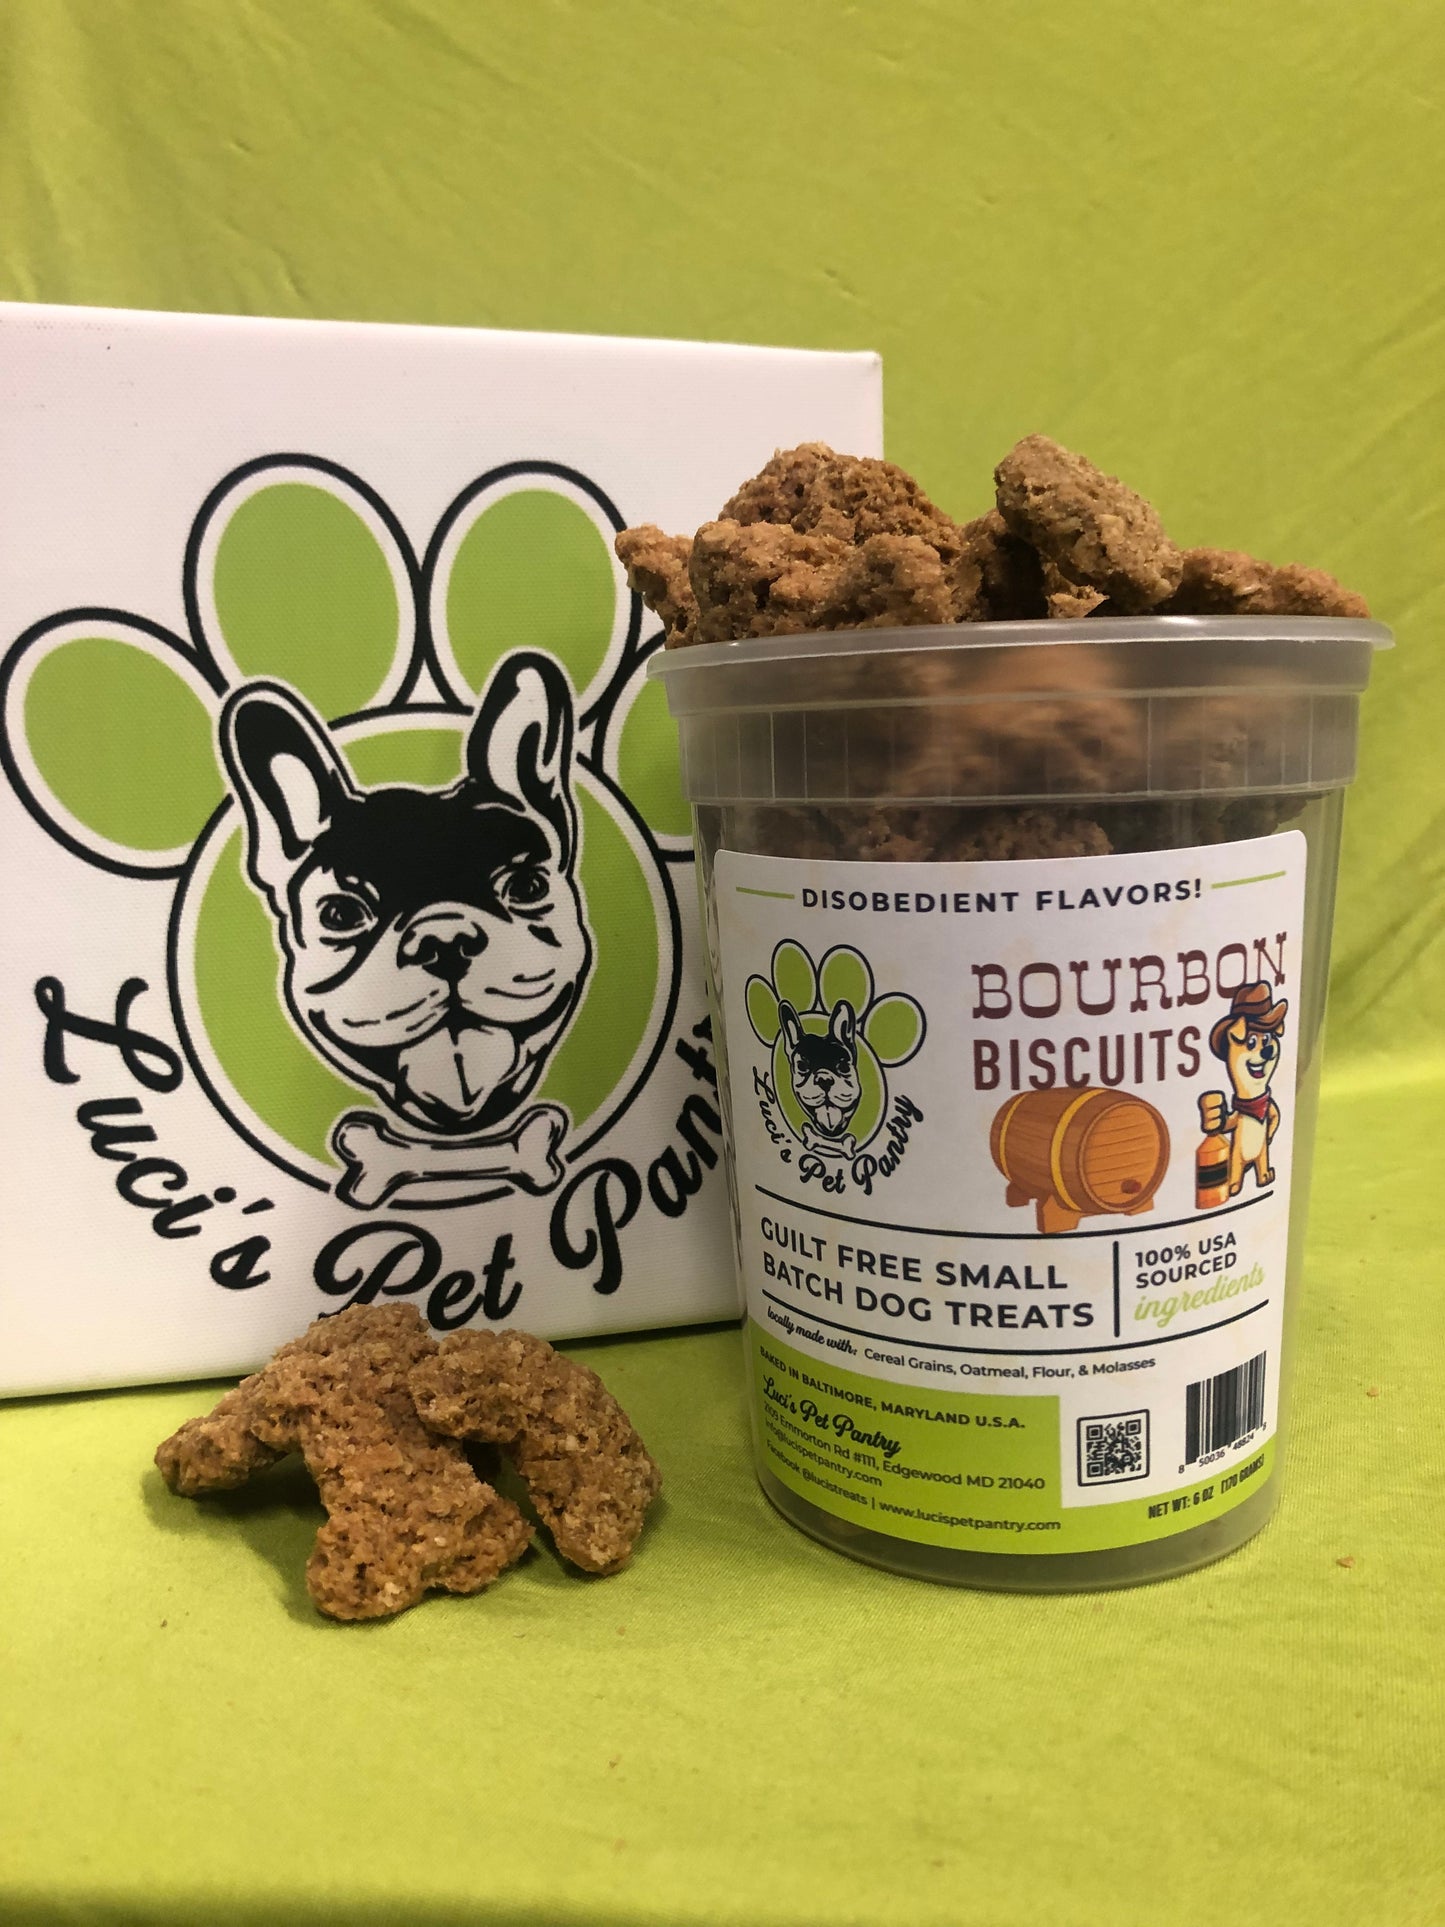 Bourbon Biscuits - All Natural "Cereal Grains" Dog & Puppy Treats - Disobedient Tub of Biscuits